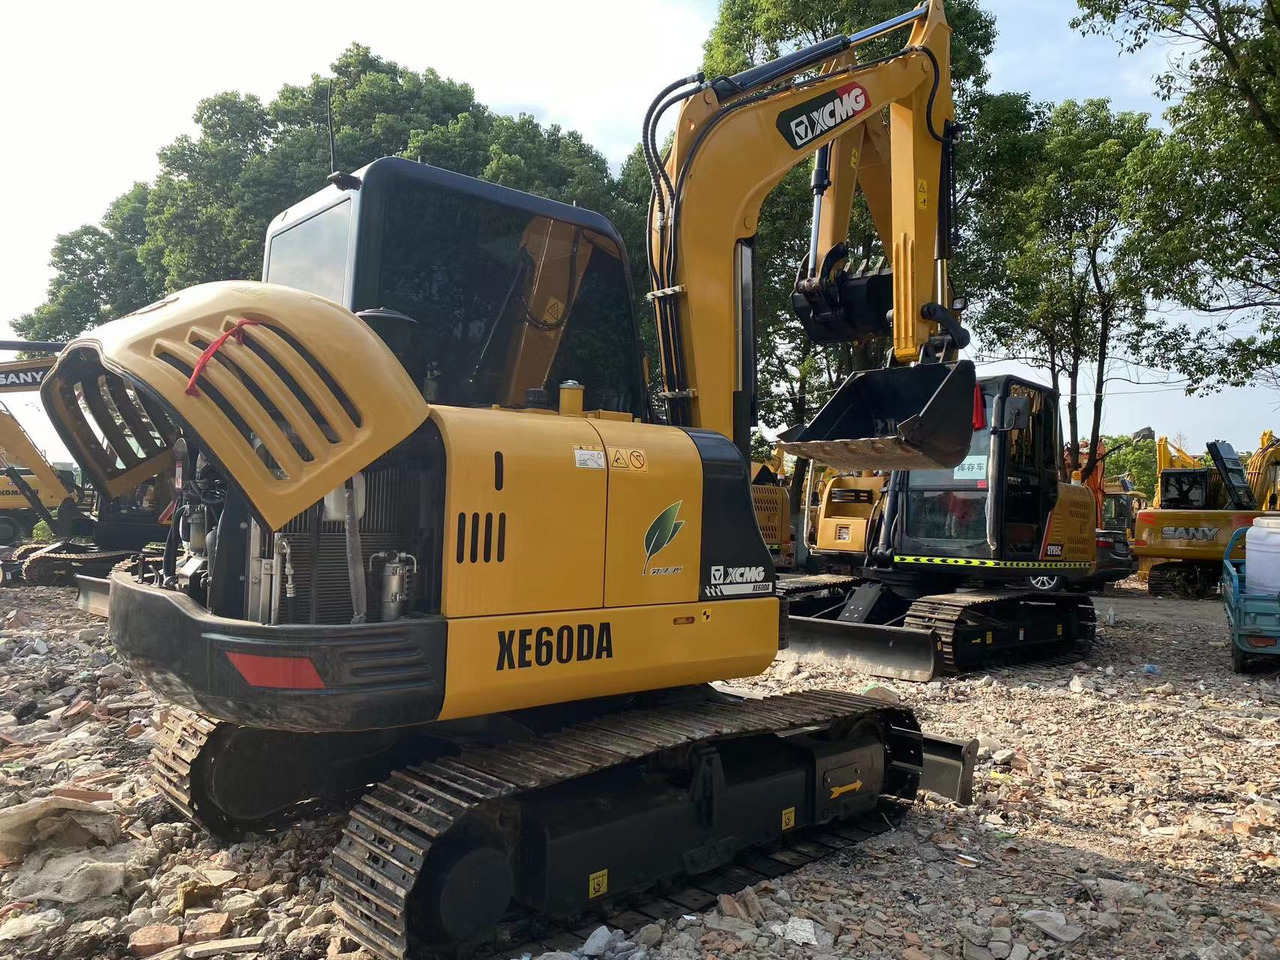 Pelle sur chenille Mini excavator XCMG XE60DA earth moving digger for sale: photos 9